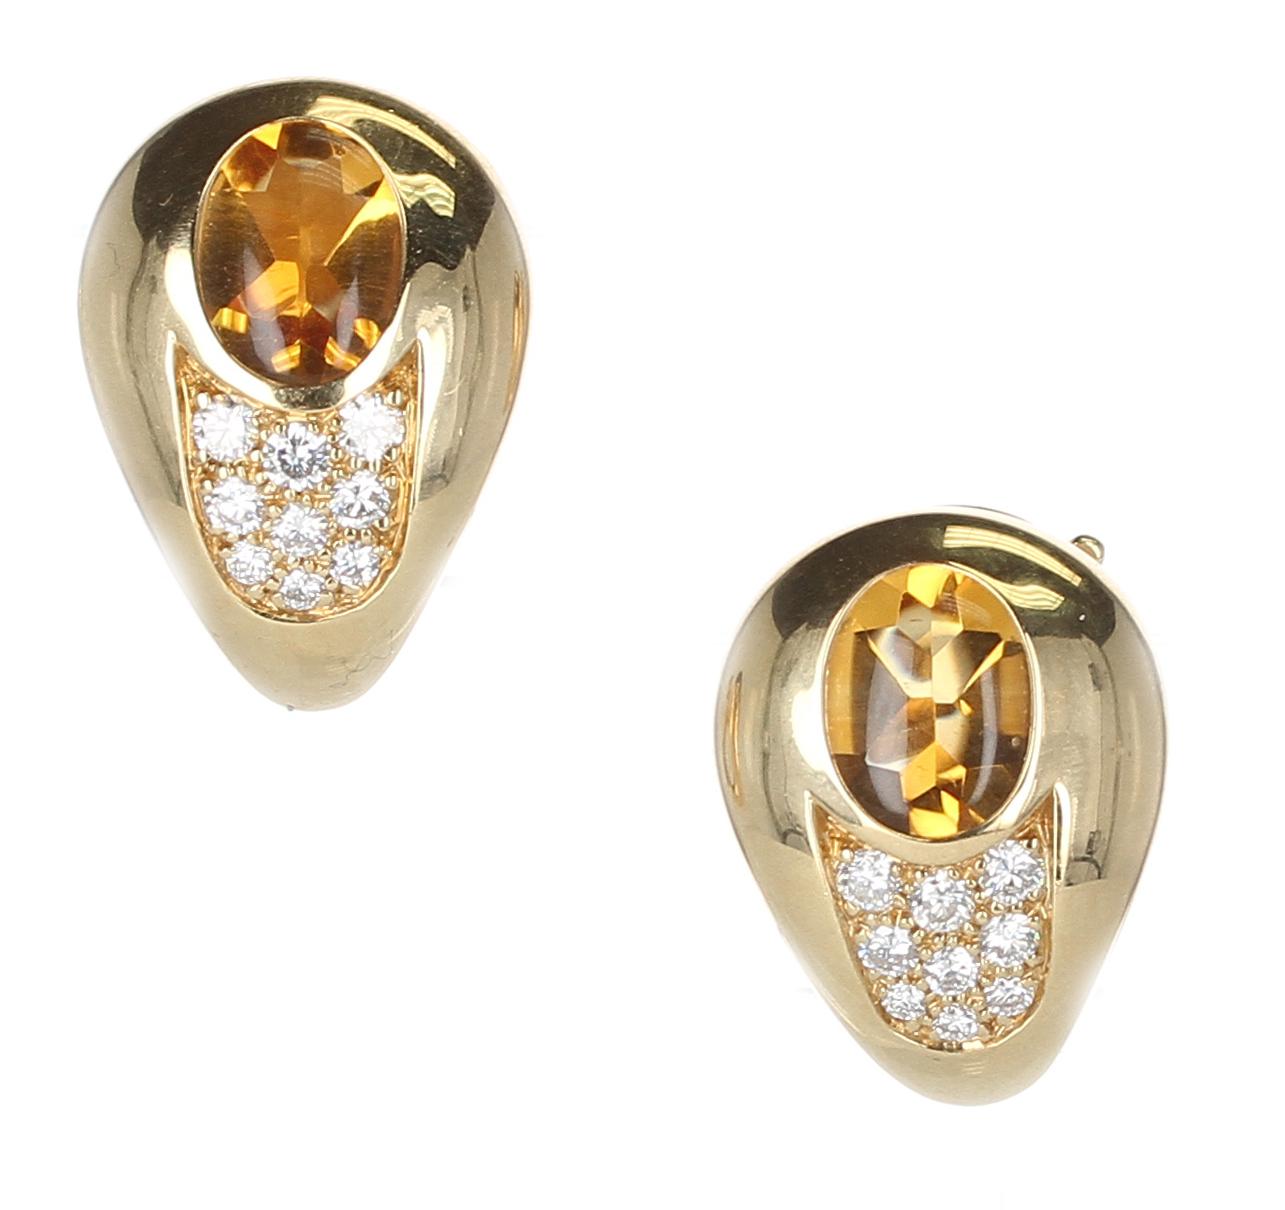 Mauboussin 2.18 ct. Citrine and 0.42 ct. Diamond Earrings, 18K Gold In Excellent Condition For Sale In New York, NY